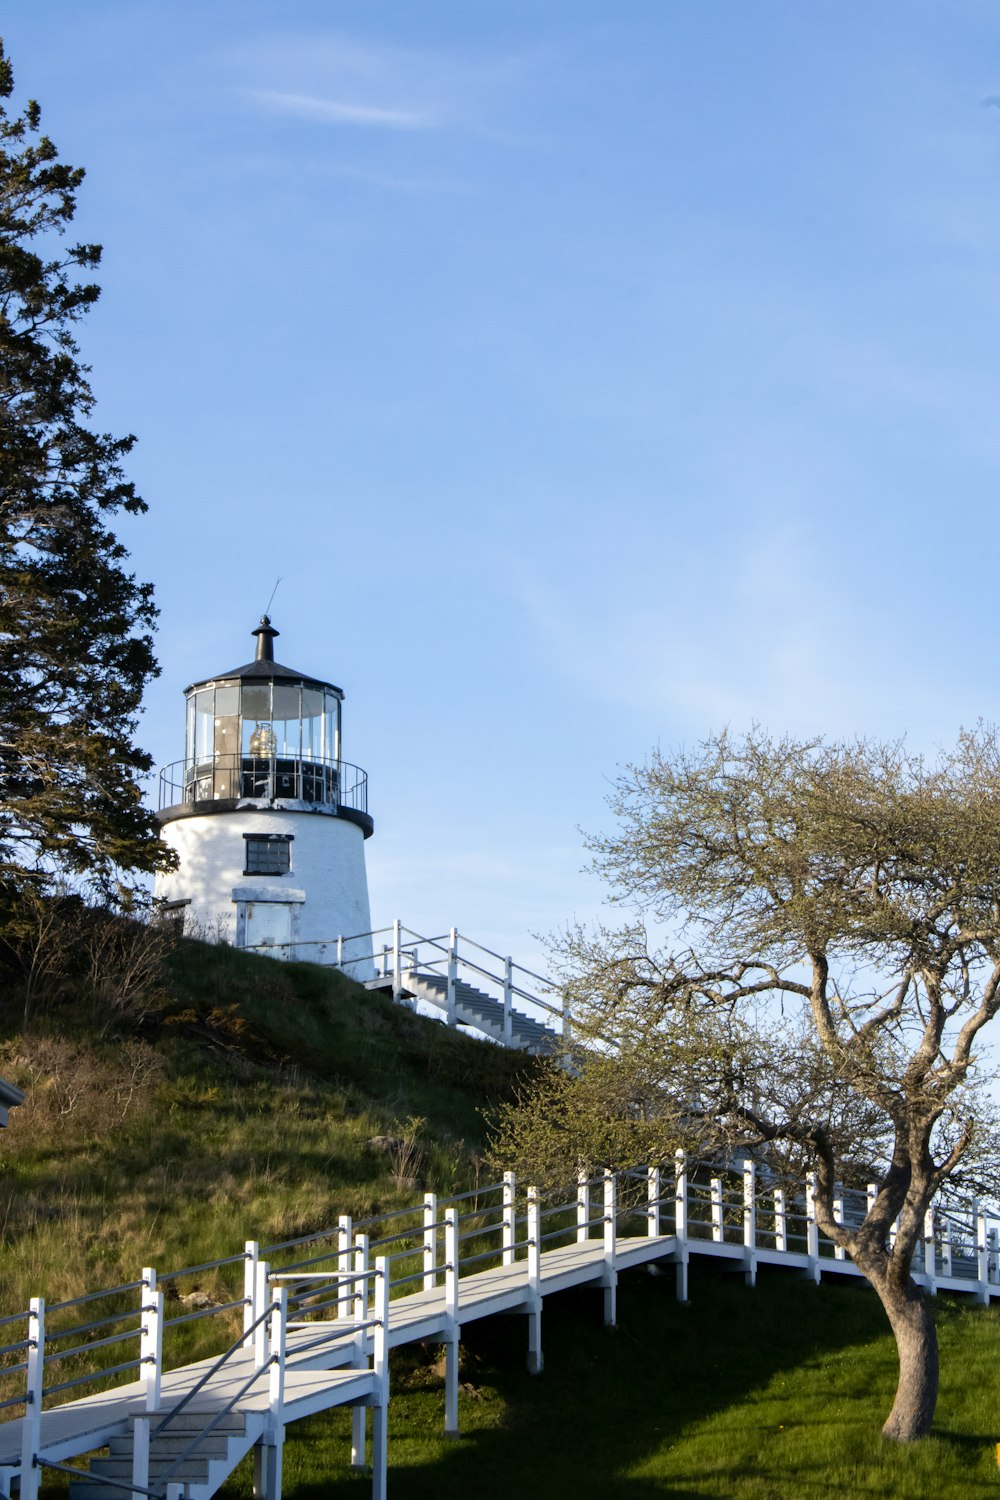 a white lighthouse on a hill